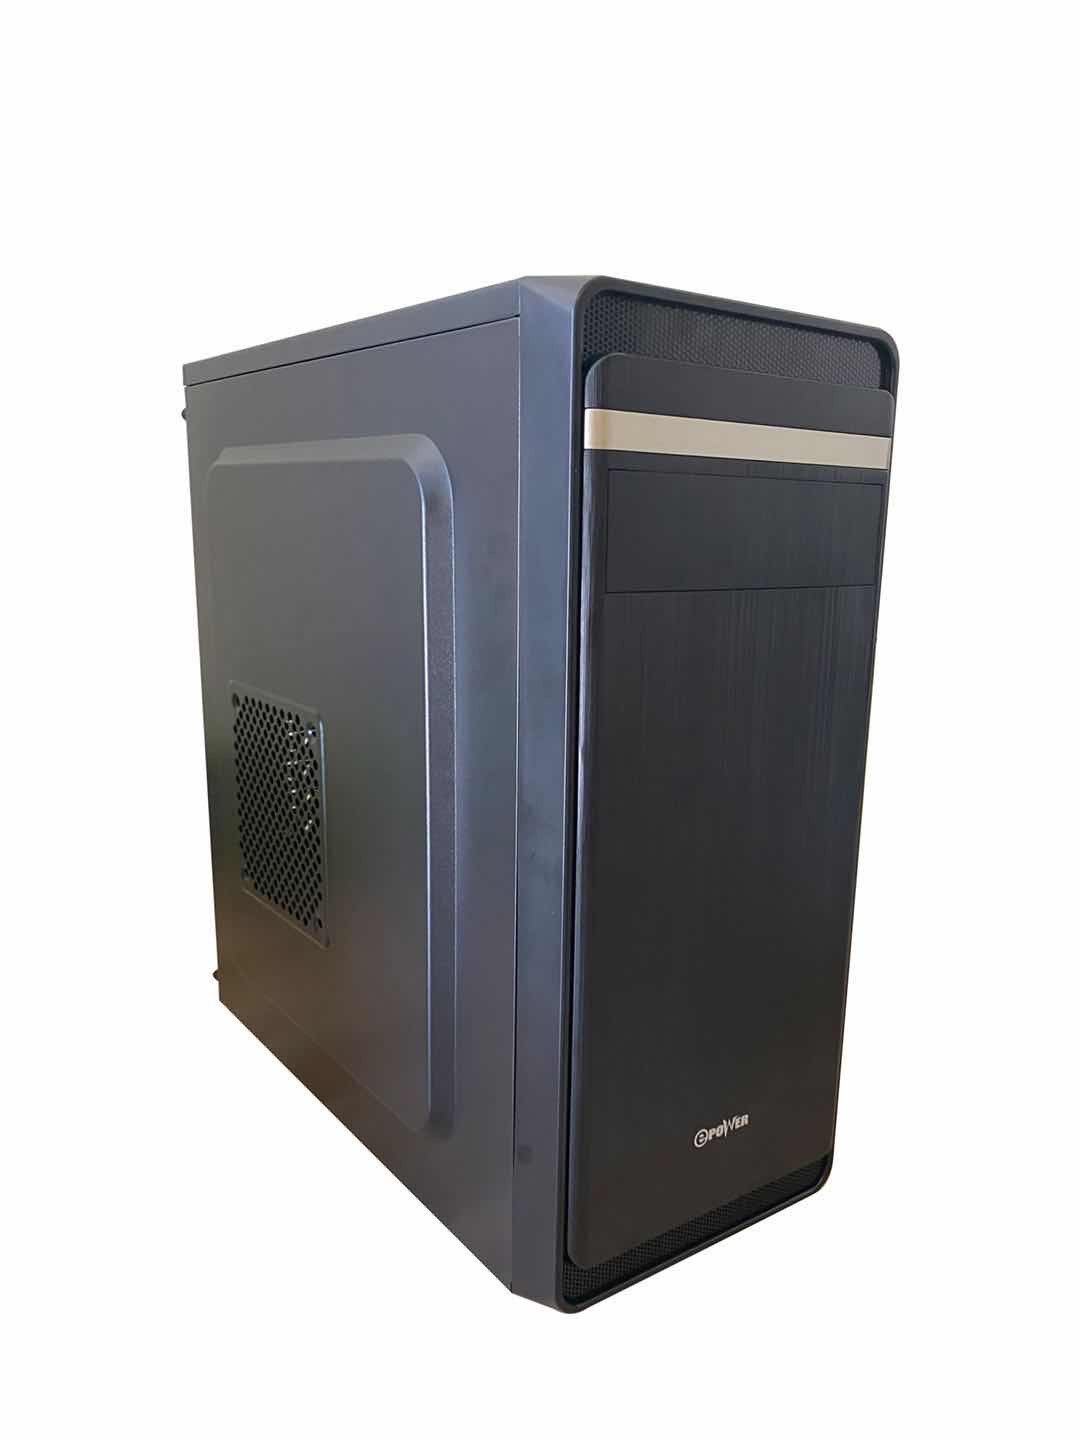 ePower EP-2002BB-500 ATX/mATX Med Tower Case With 500W Power Supply